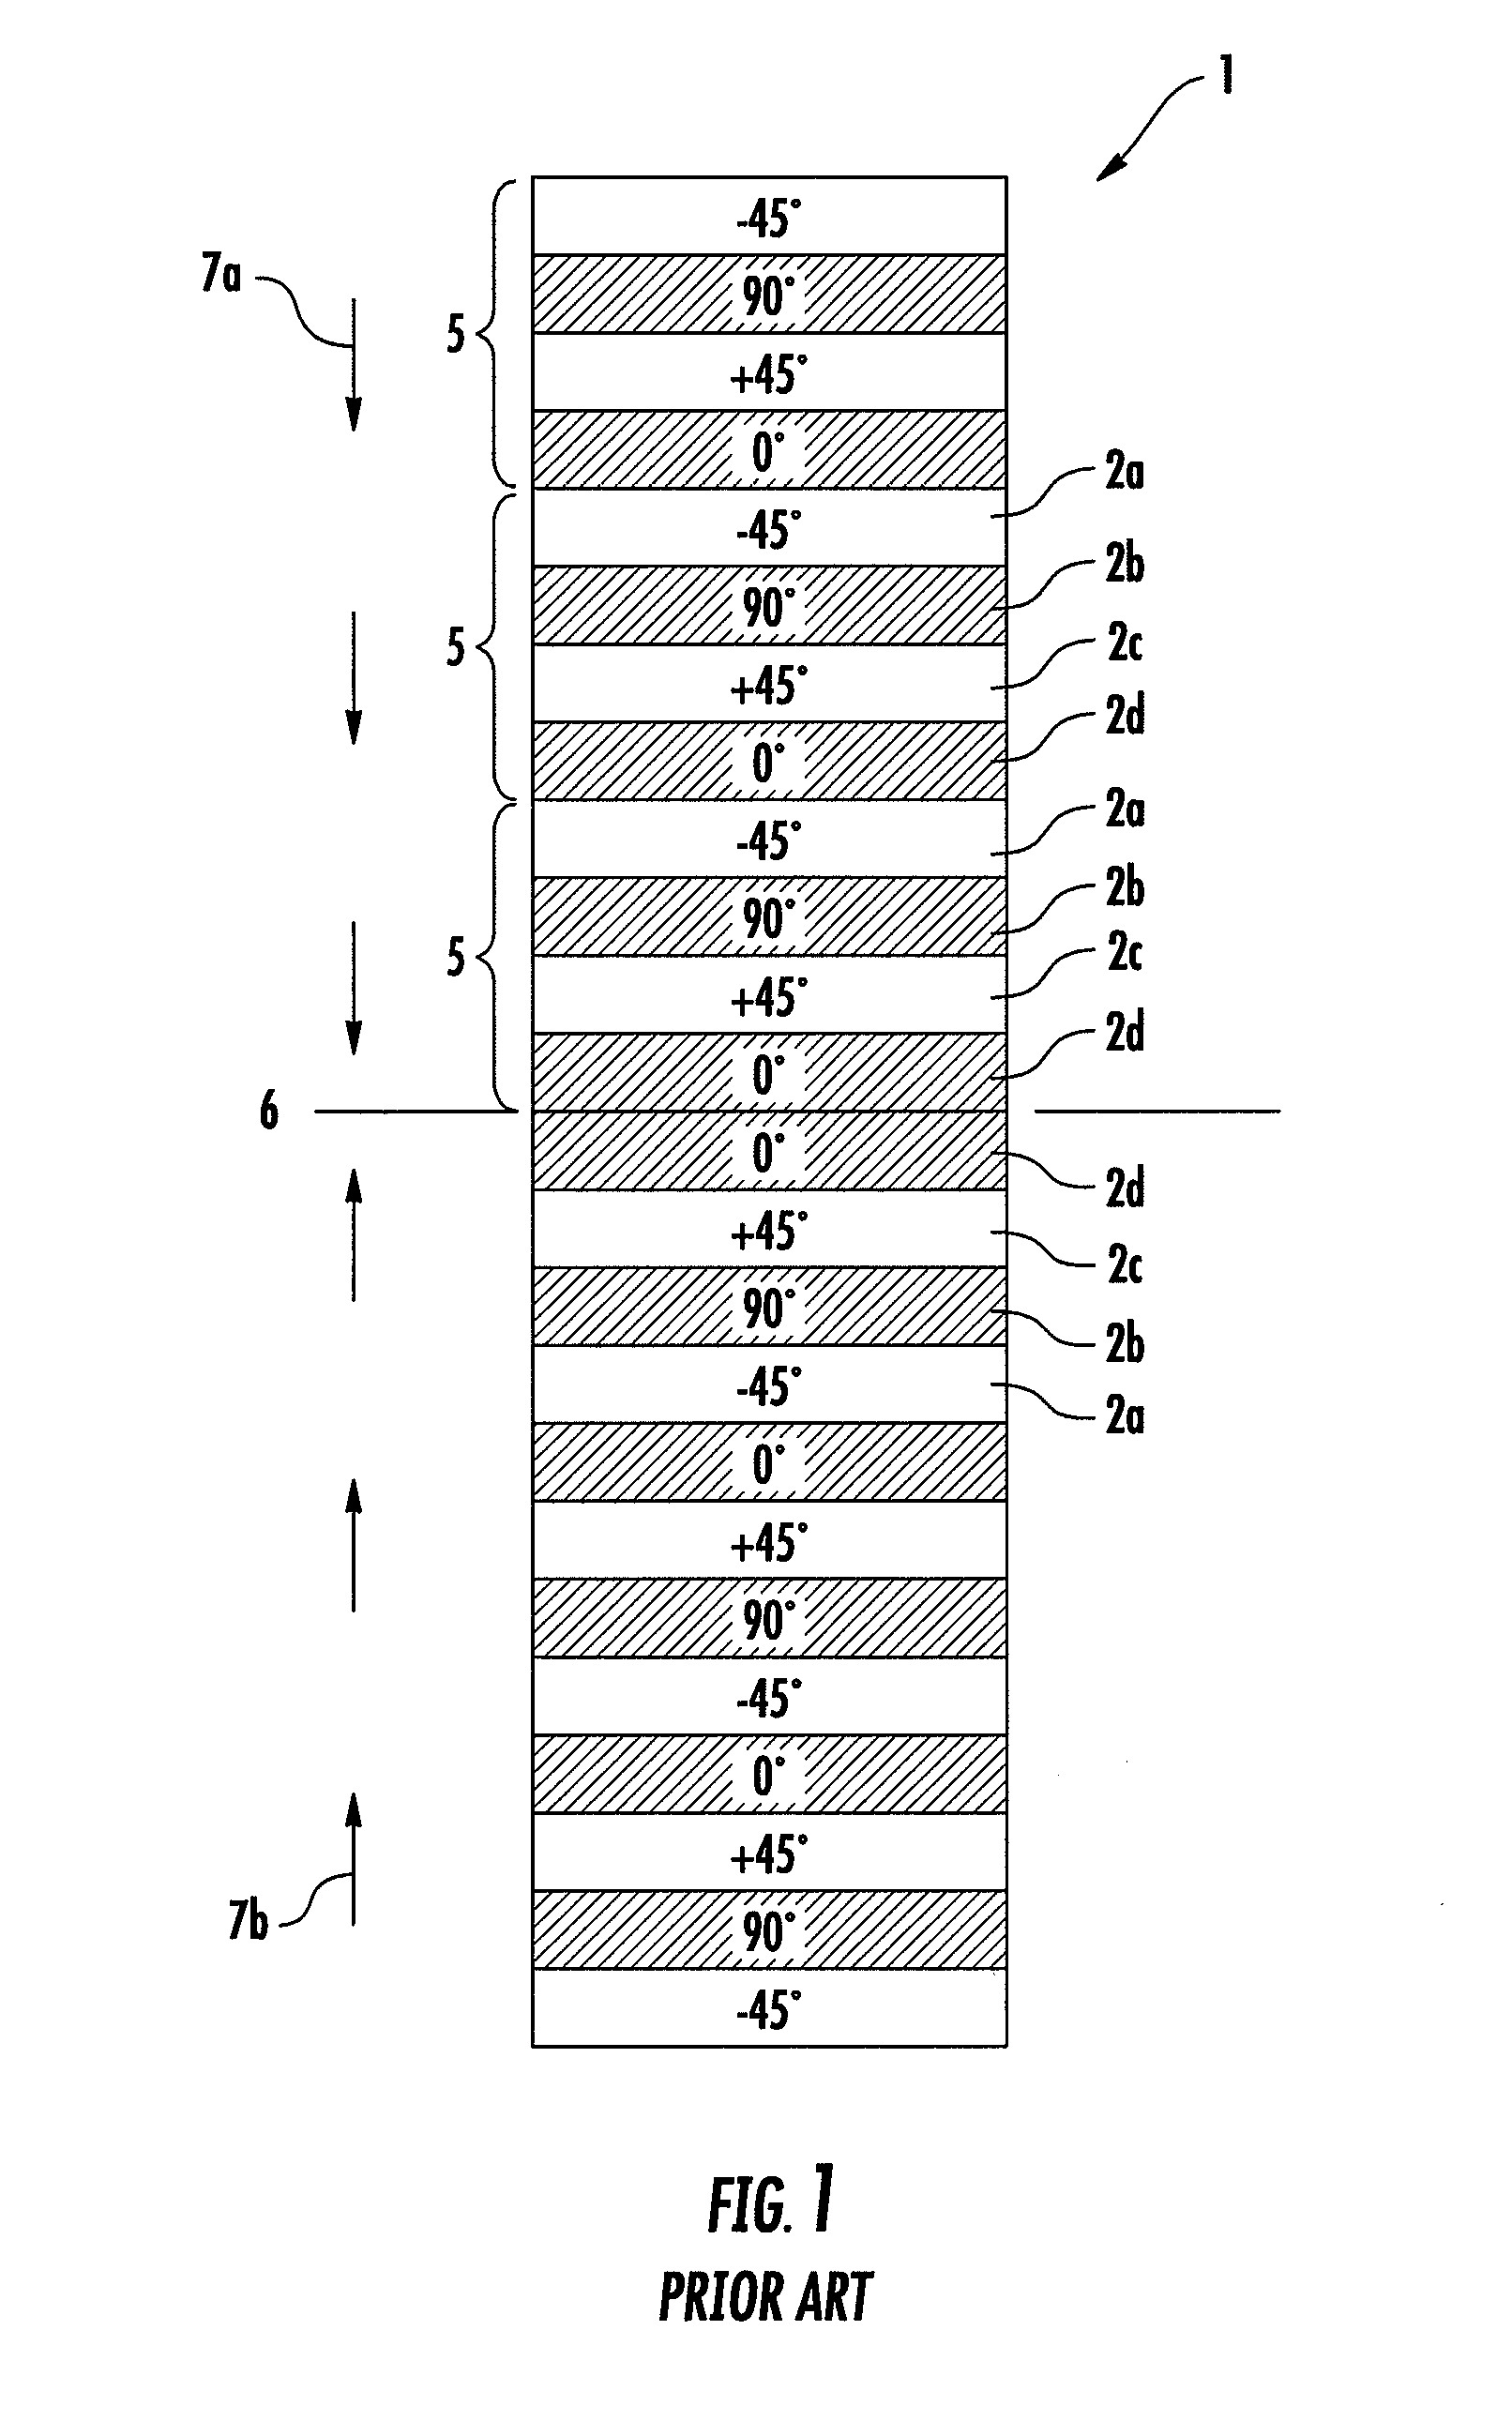 Composite laminated structures and methods for manufacturing and using the same